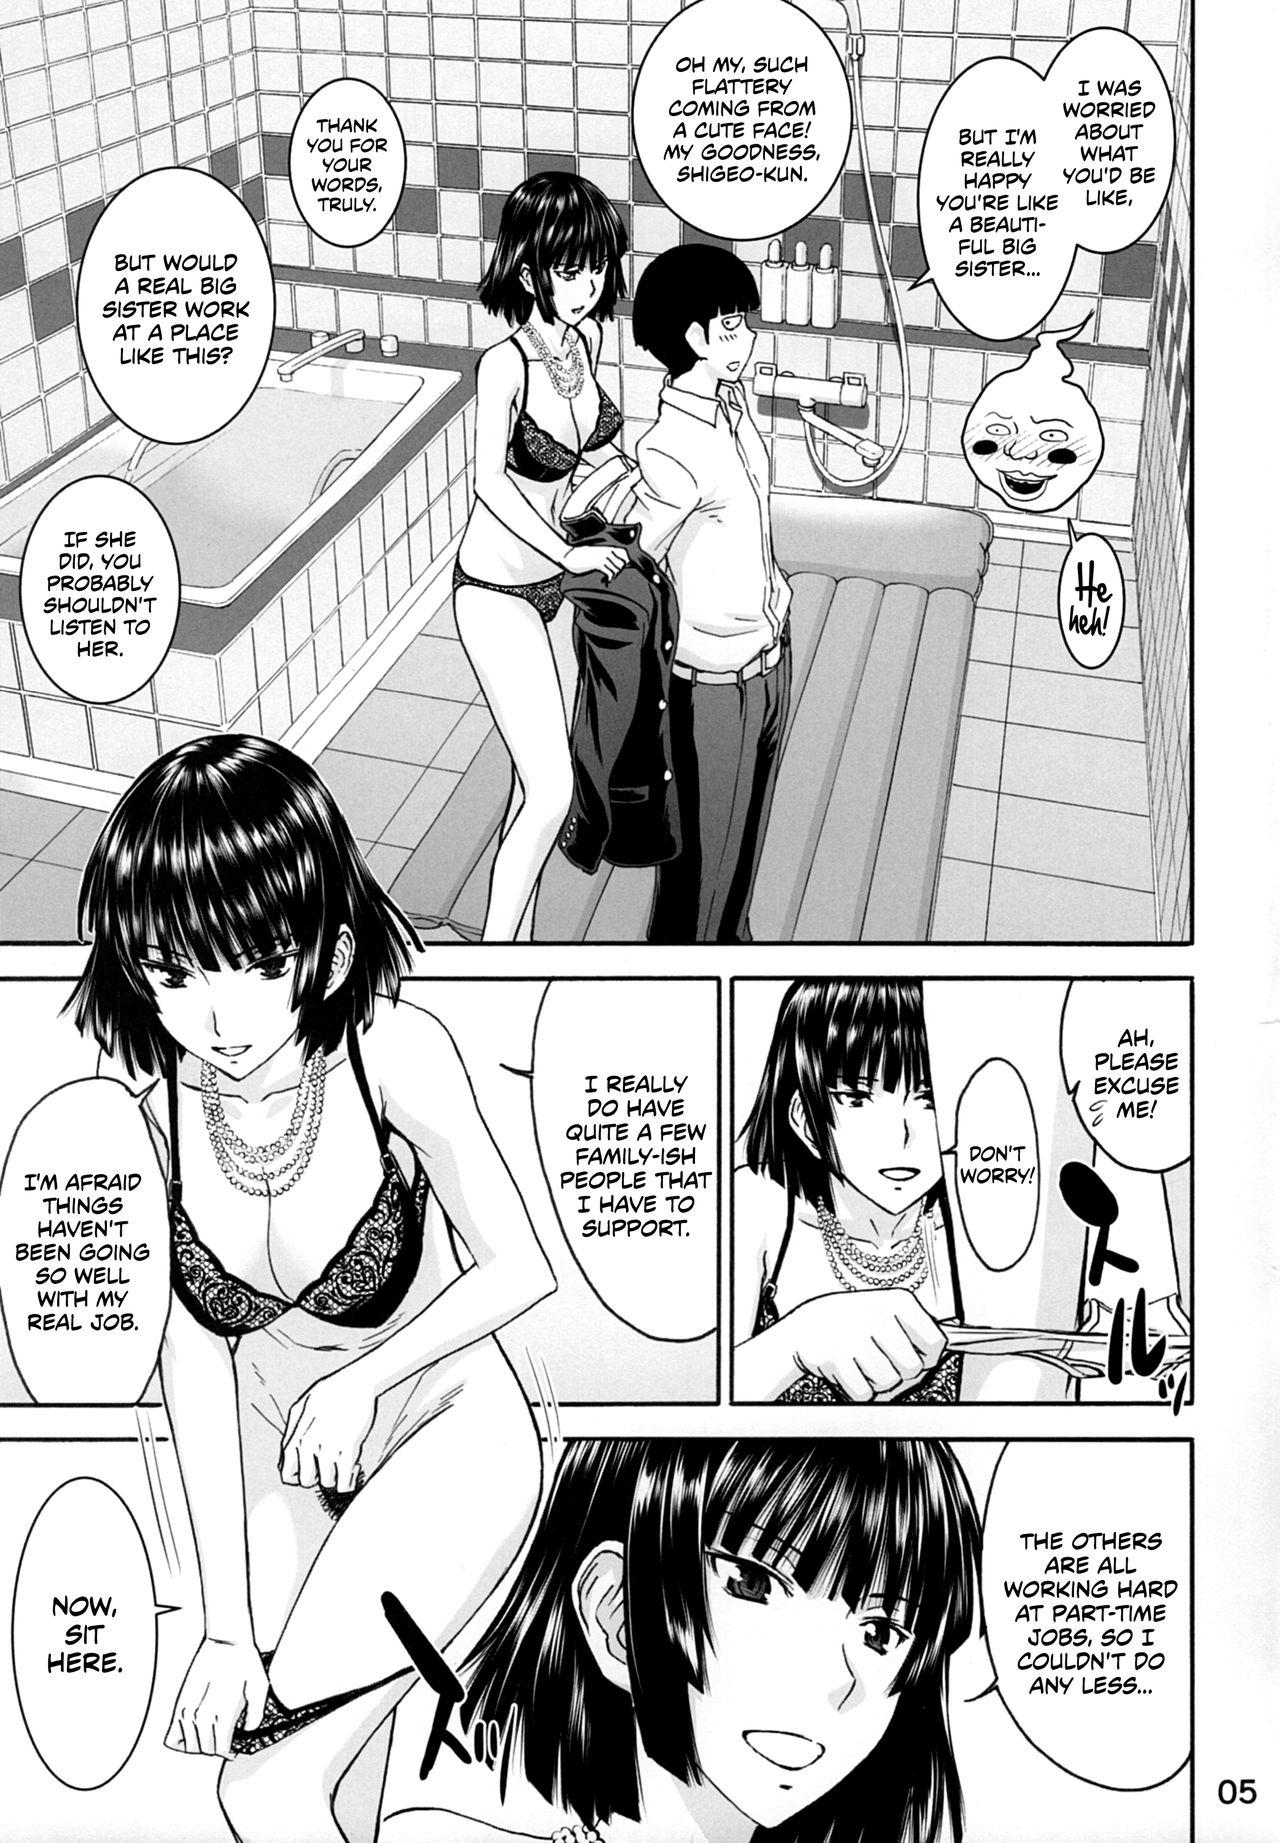 Reality (C90) [High Thrust (Inomaru)] Current B-Class Rank 1 Hero Losing Your Virginity Where Hellish Fubuki-sama Offers Her Services!! (One Punch Man, Mob Psycho 100) [English] [EHCOVE] - One punch man Mob psycho 100 Hot Fucking - Page 4